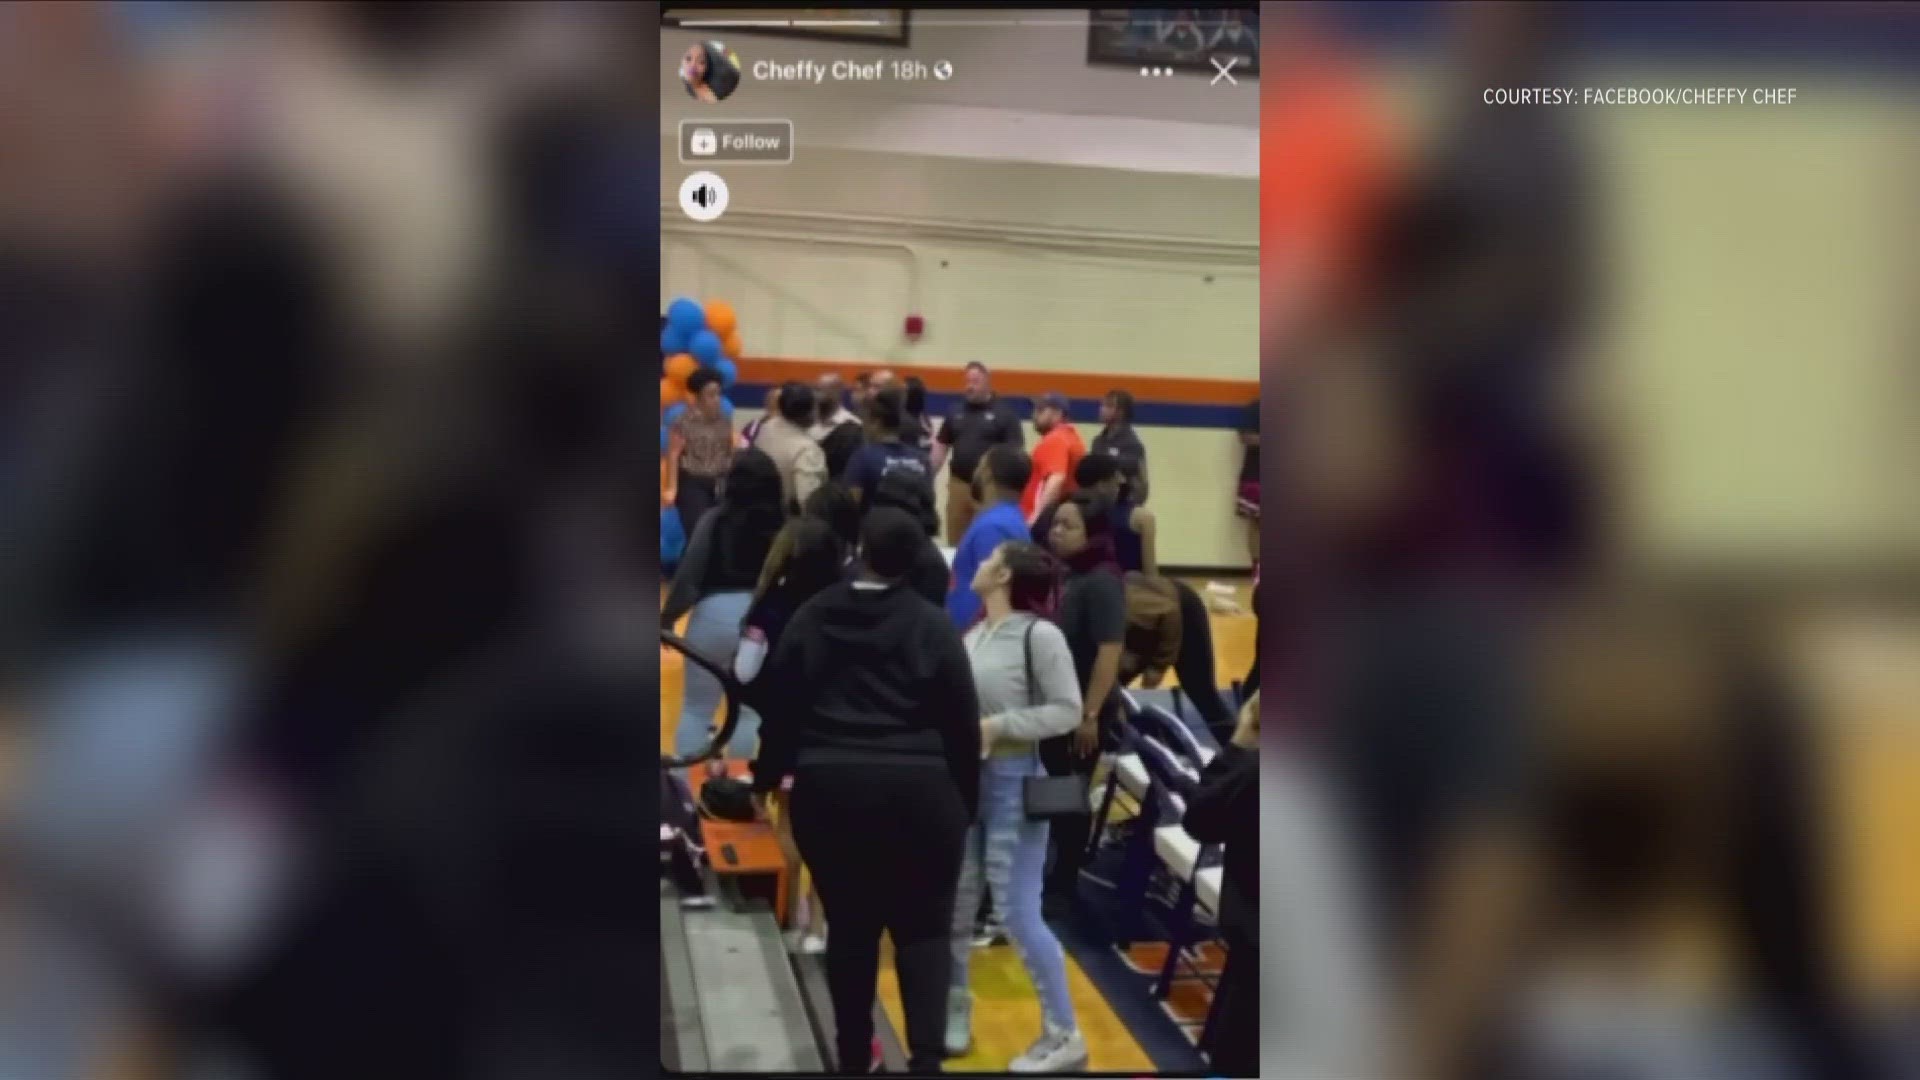 On Monday, March 4, a fight broke out during a basketball game between Ridgeway High School and Bolivar Central High School.